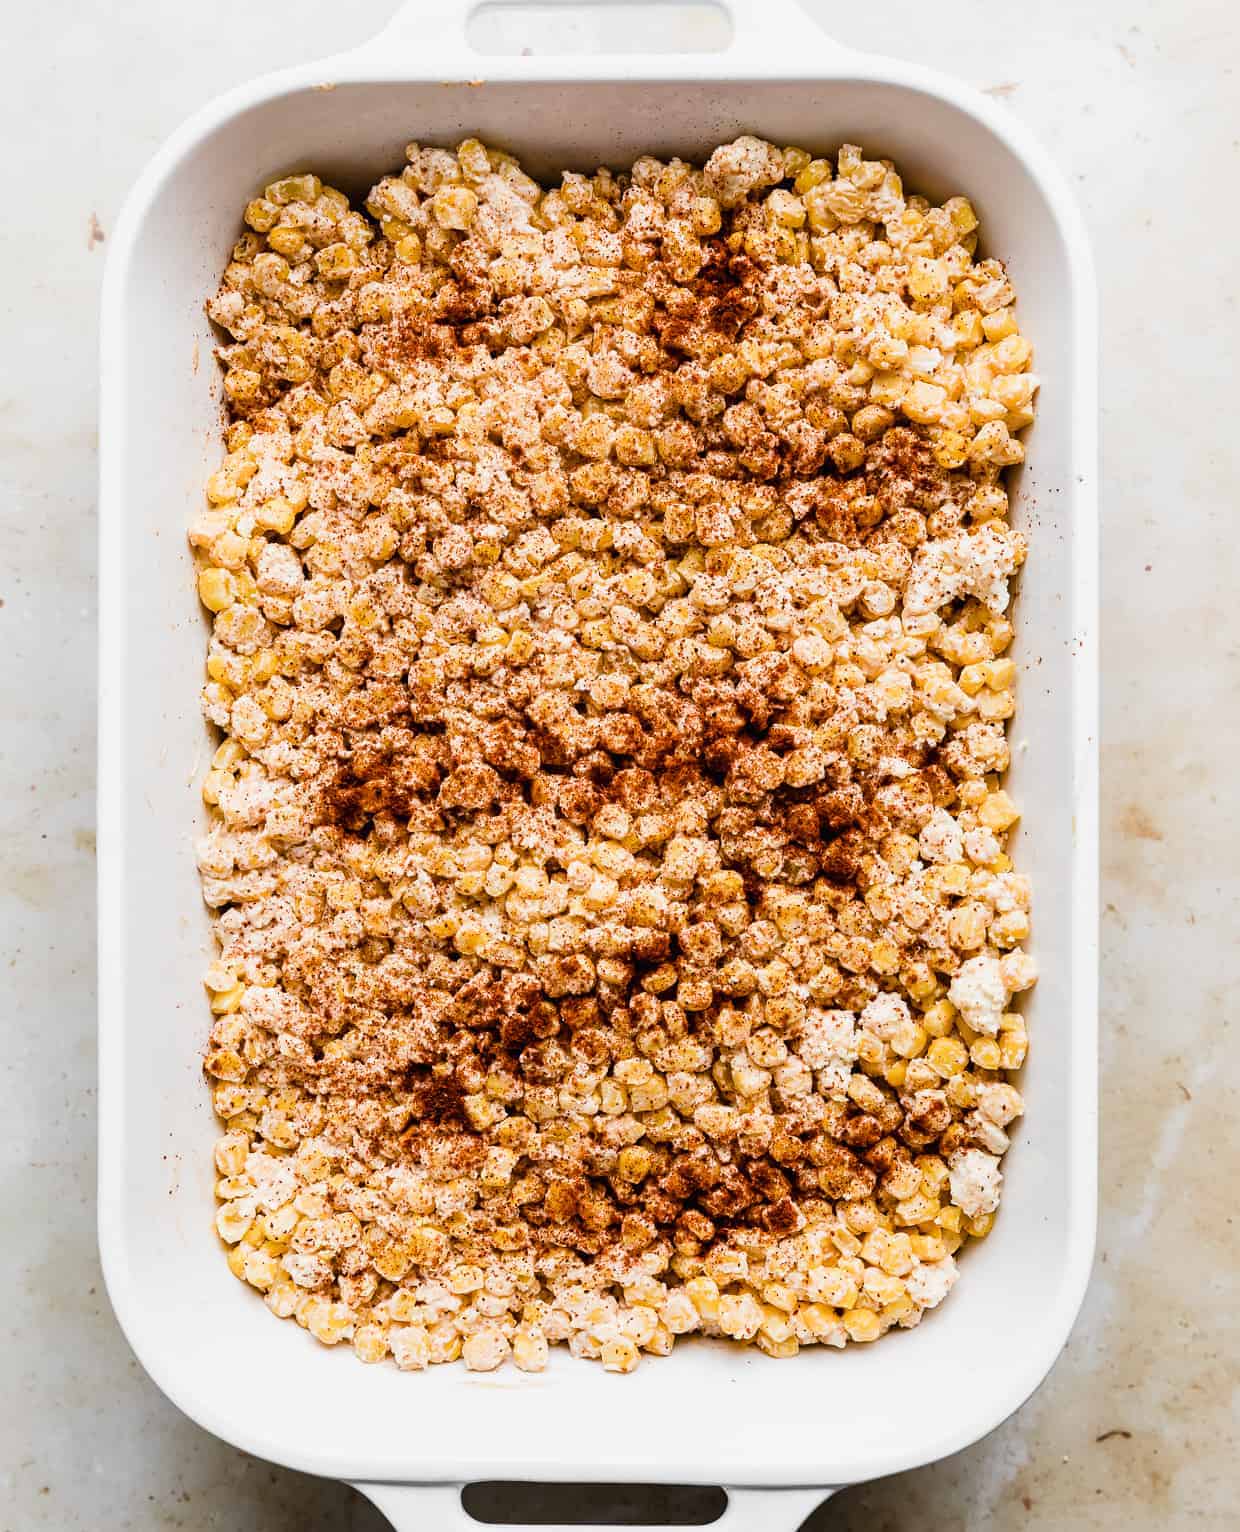 A white rectangular baking dish full of Mexican Street Corn Casserole that has been sprinkled with chili powder.